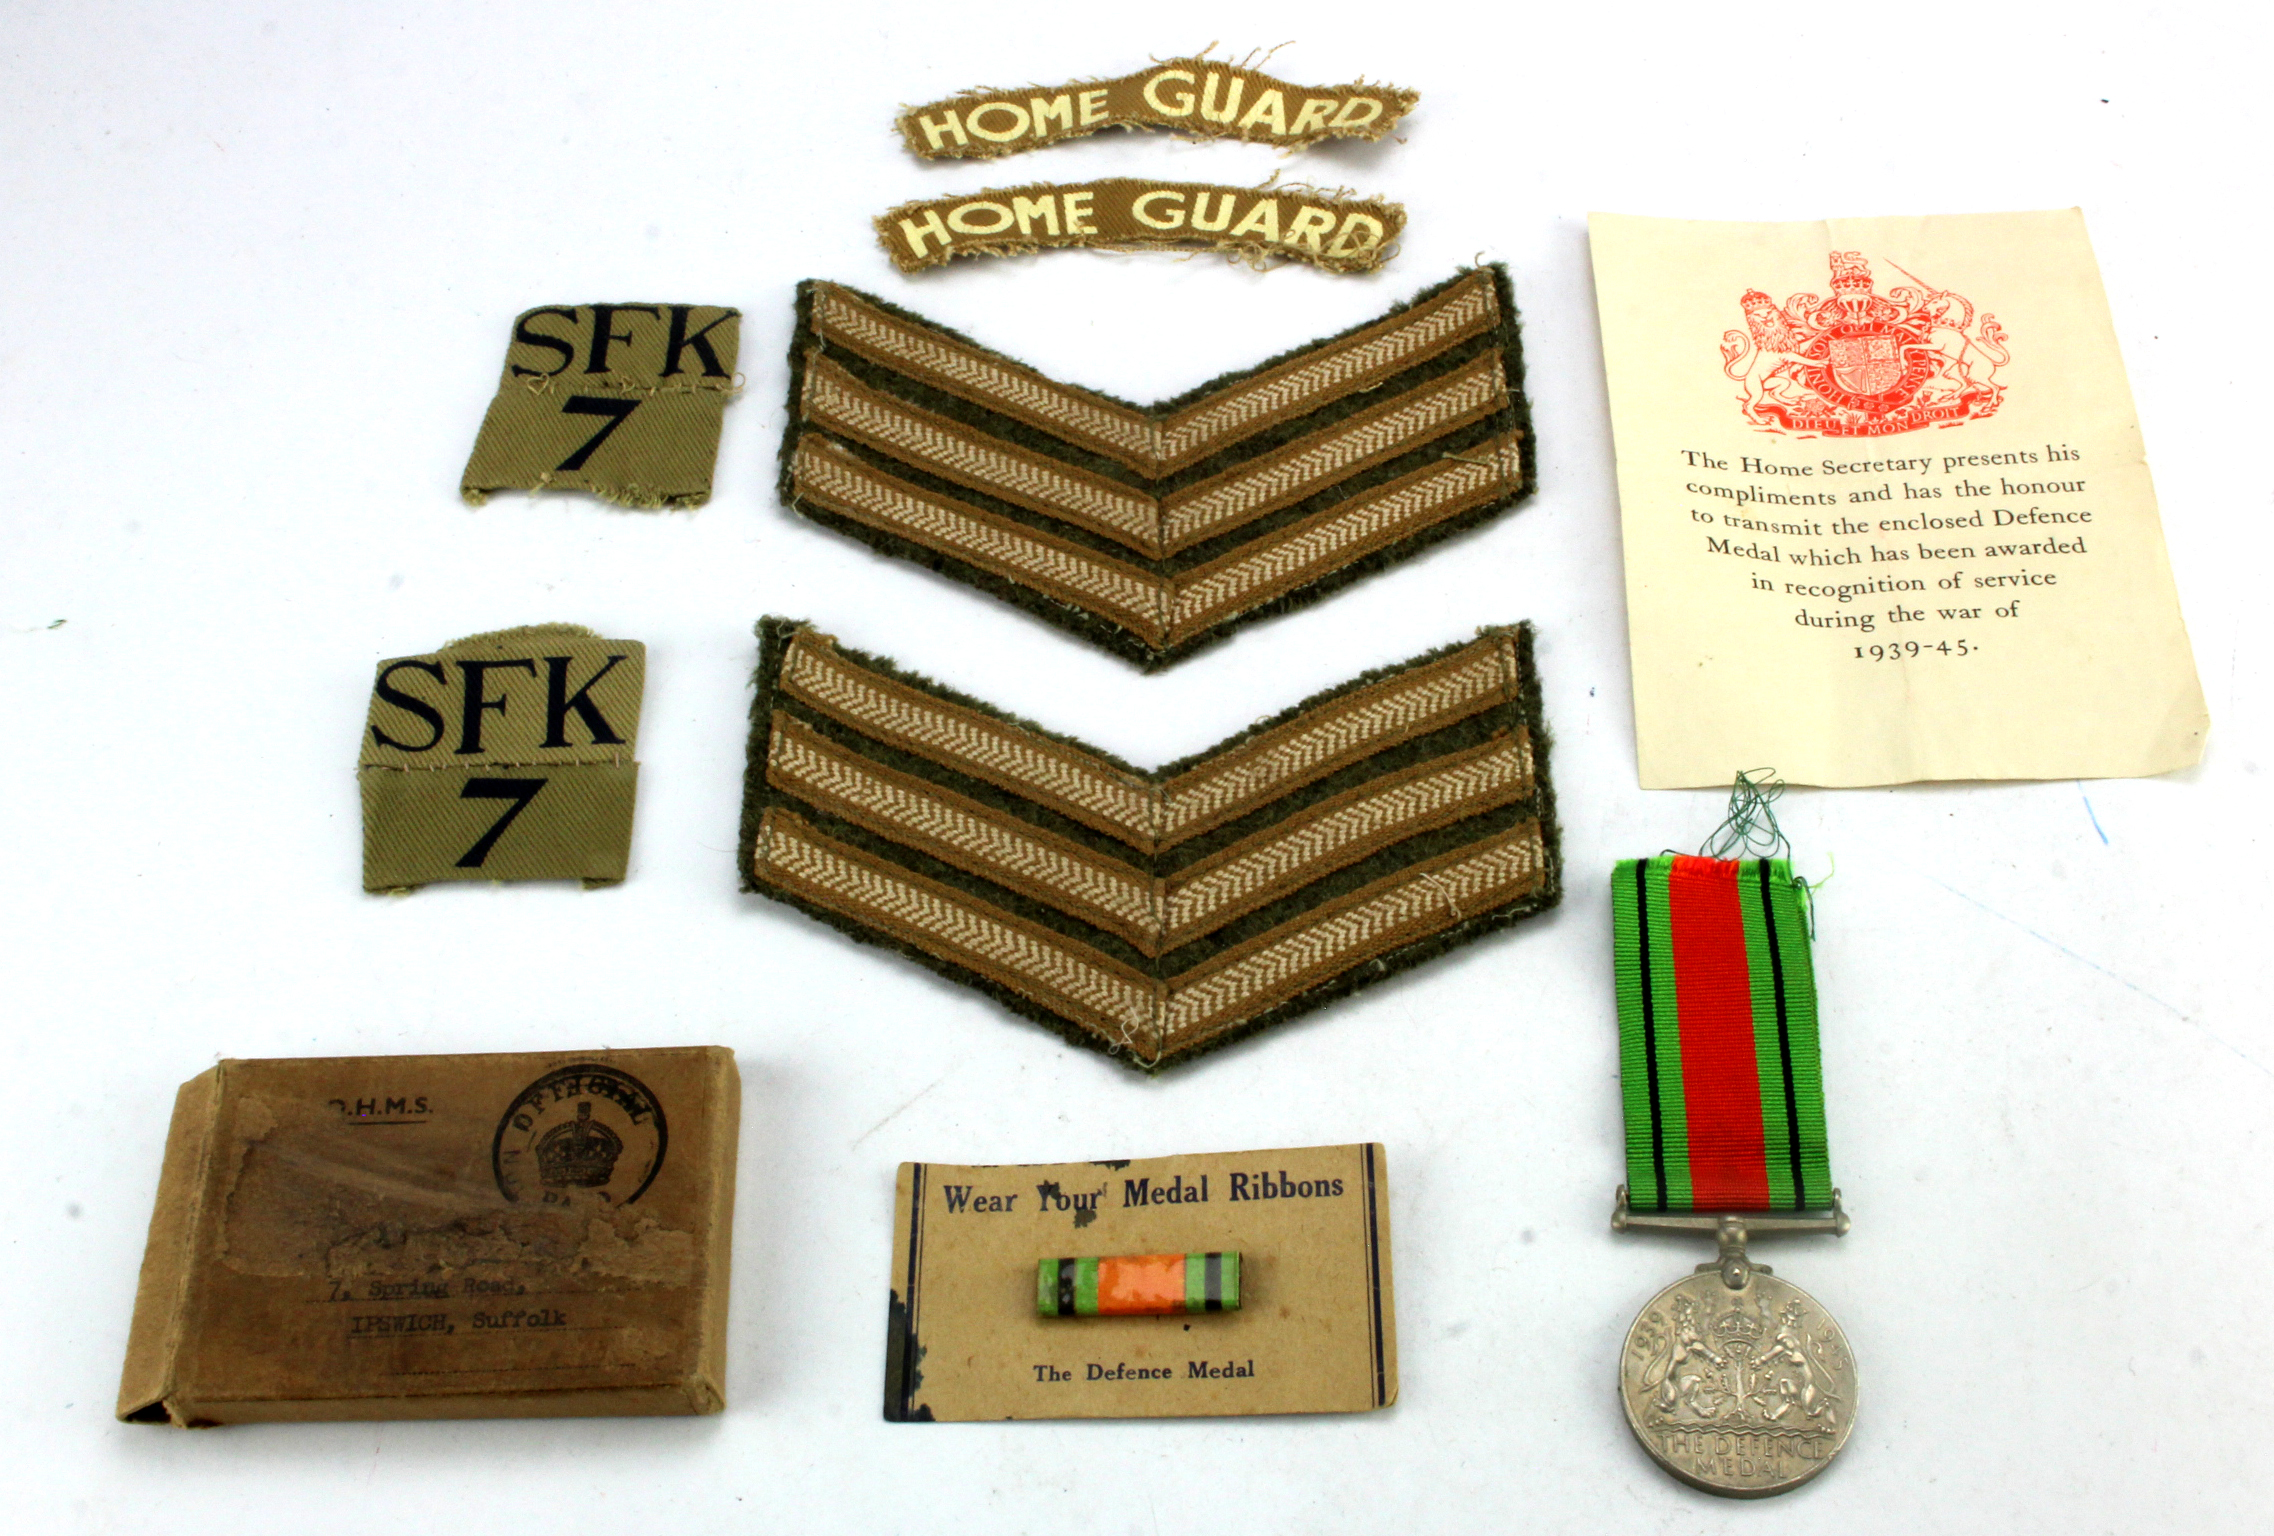 WW2 Home Guard 7th Suffolk titles div patches (SFK 7) and set of Sgt stripes as removed from